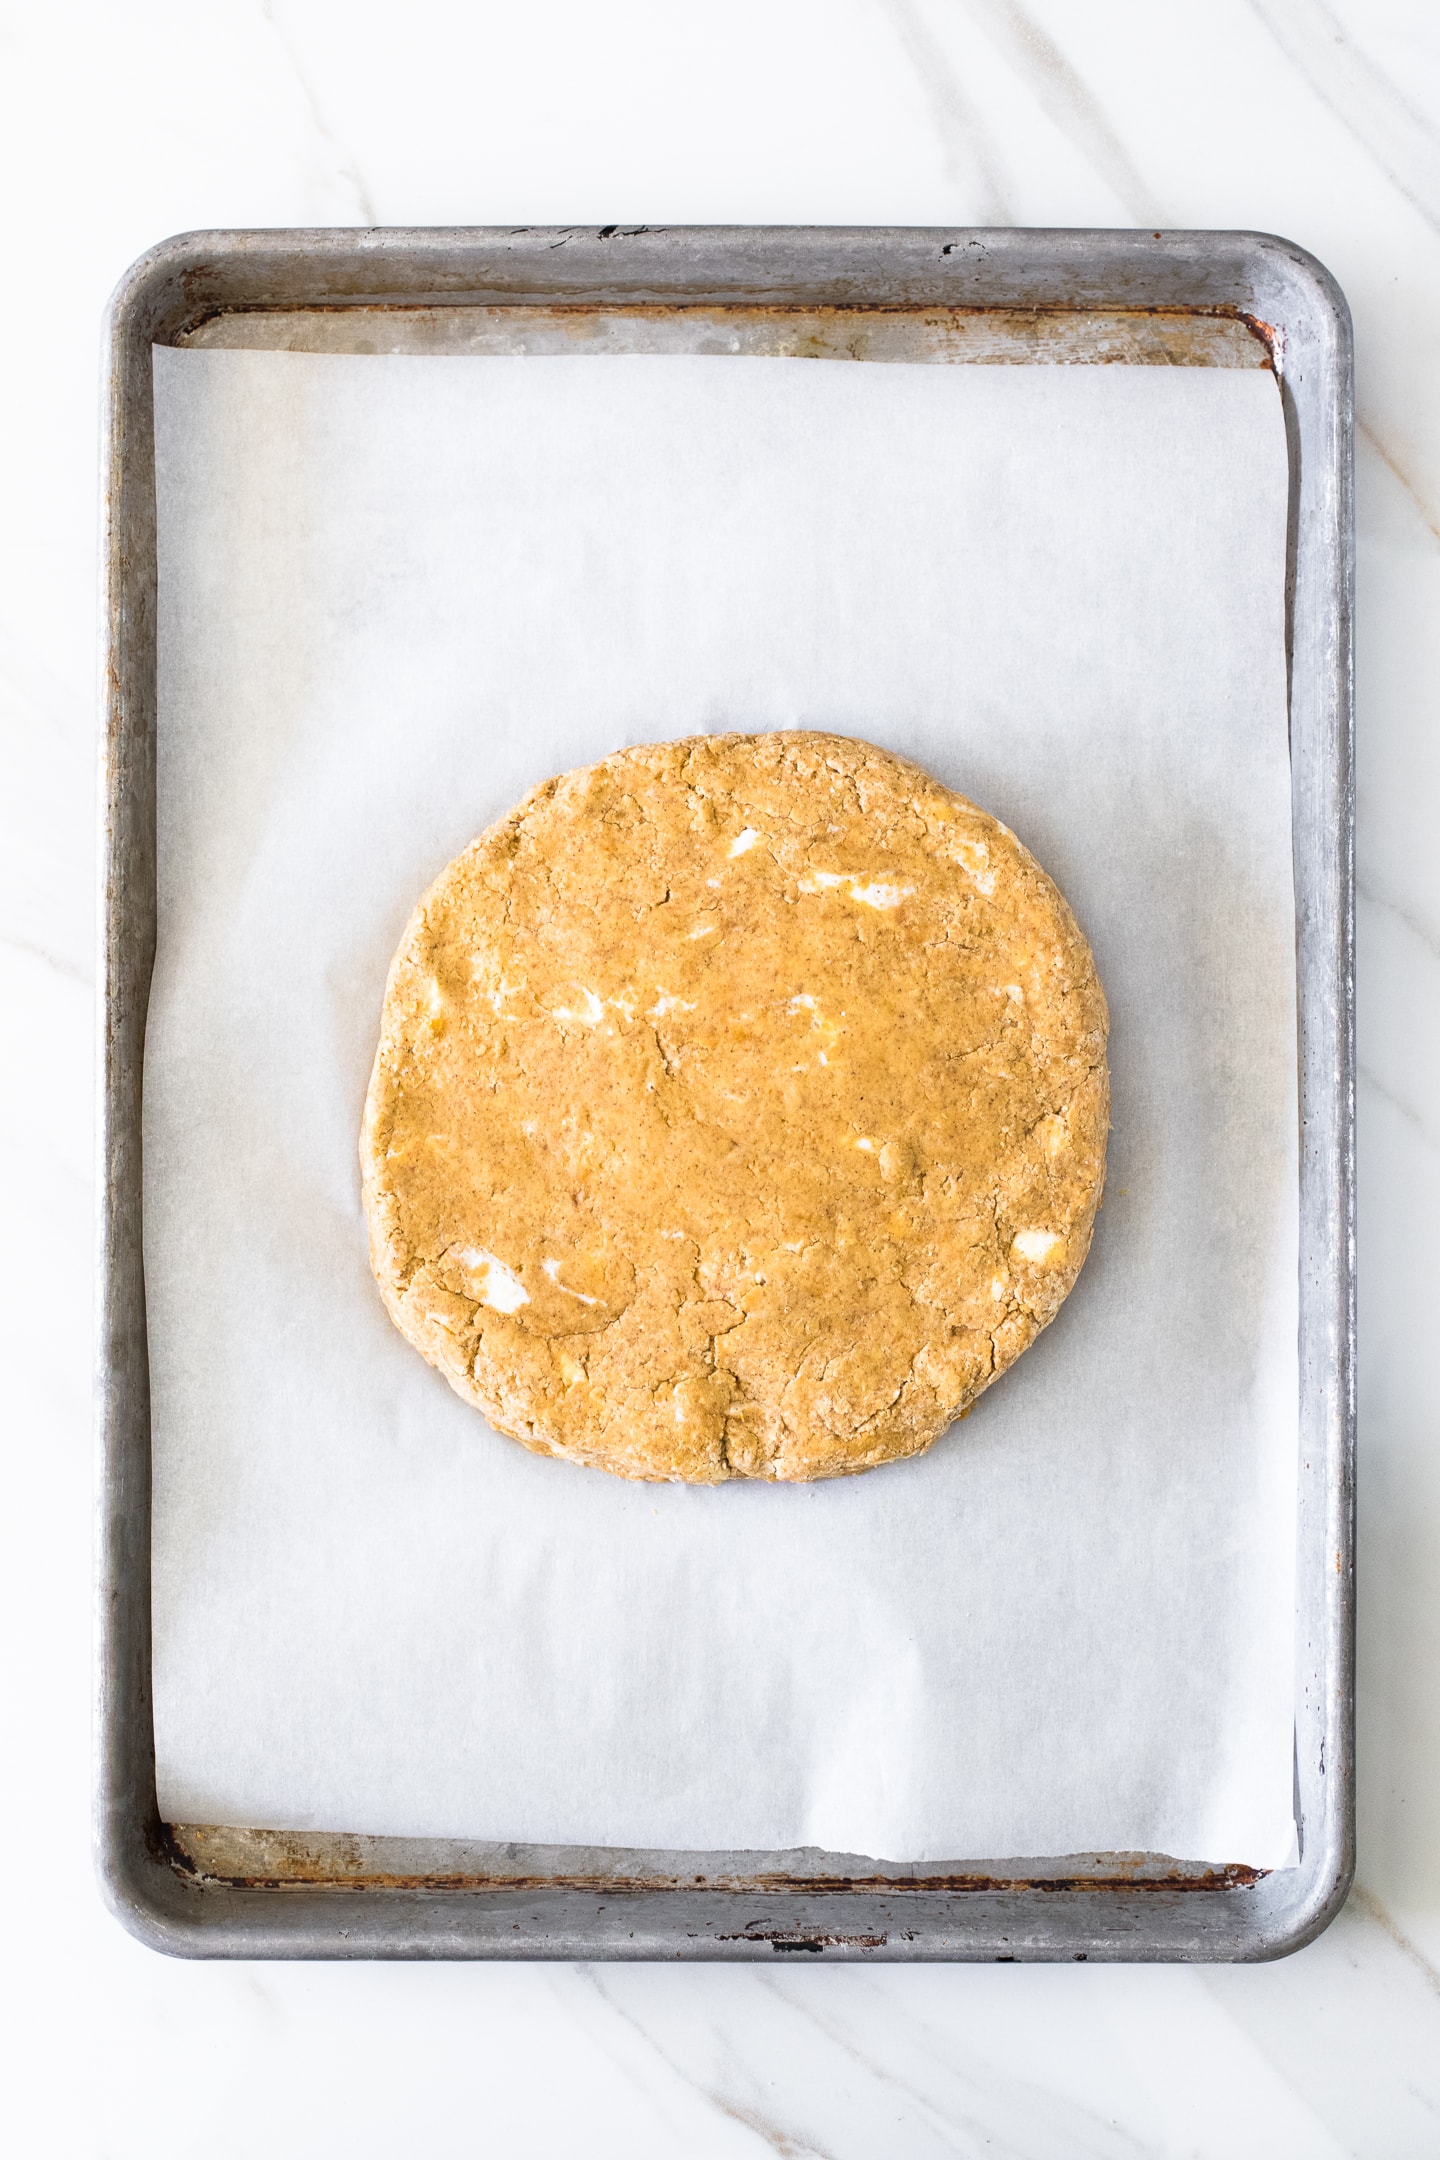 Overhead view of pumpkin scone dough shaped into a disc and placed on a parchment-lined baking tray.